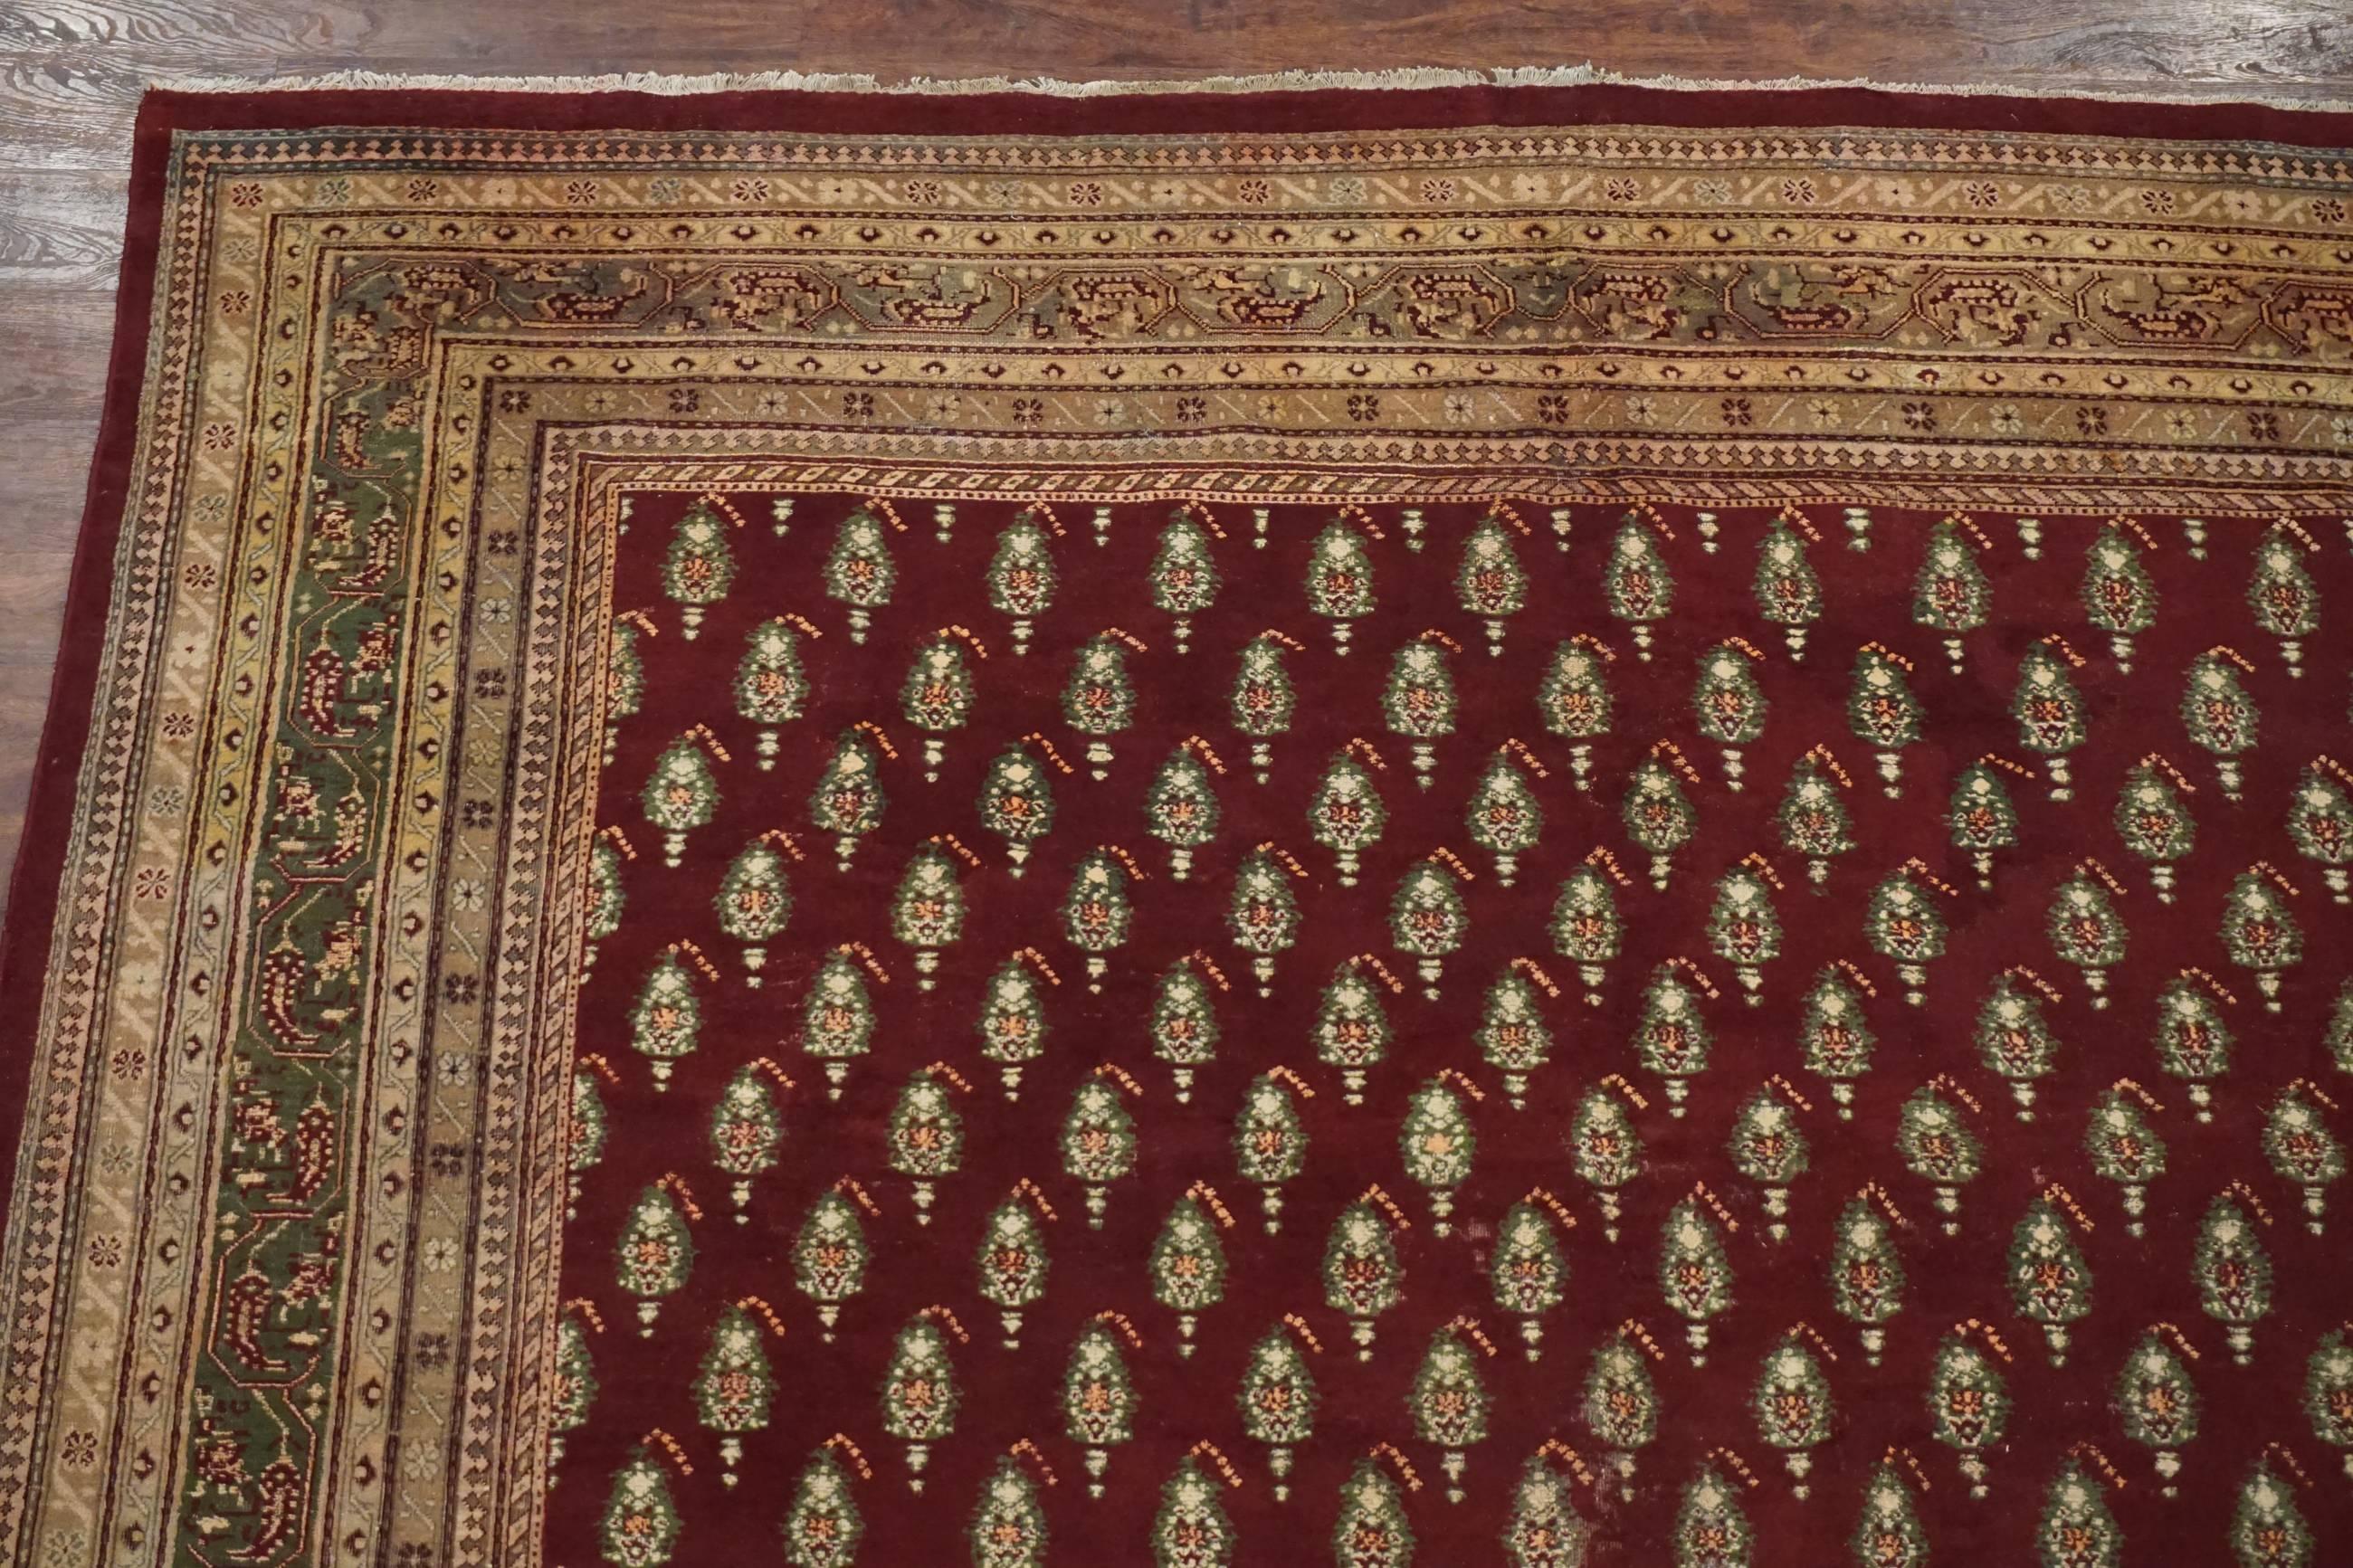 Antique Indian Agra Paisley Rug, circa 1900 In Excellent Condition For Sale In Northridge, CA